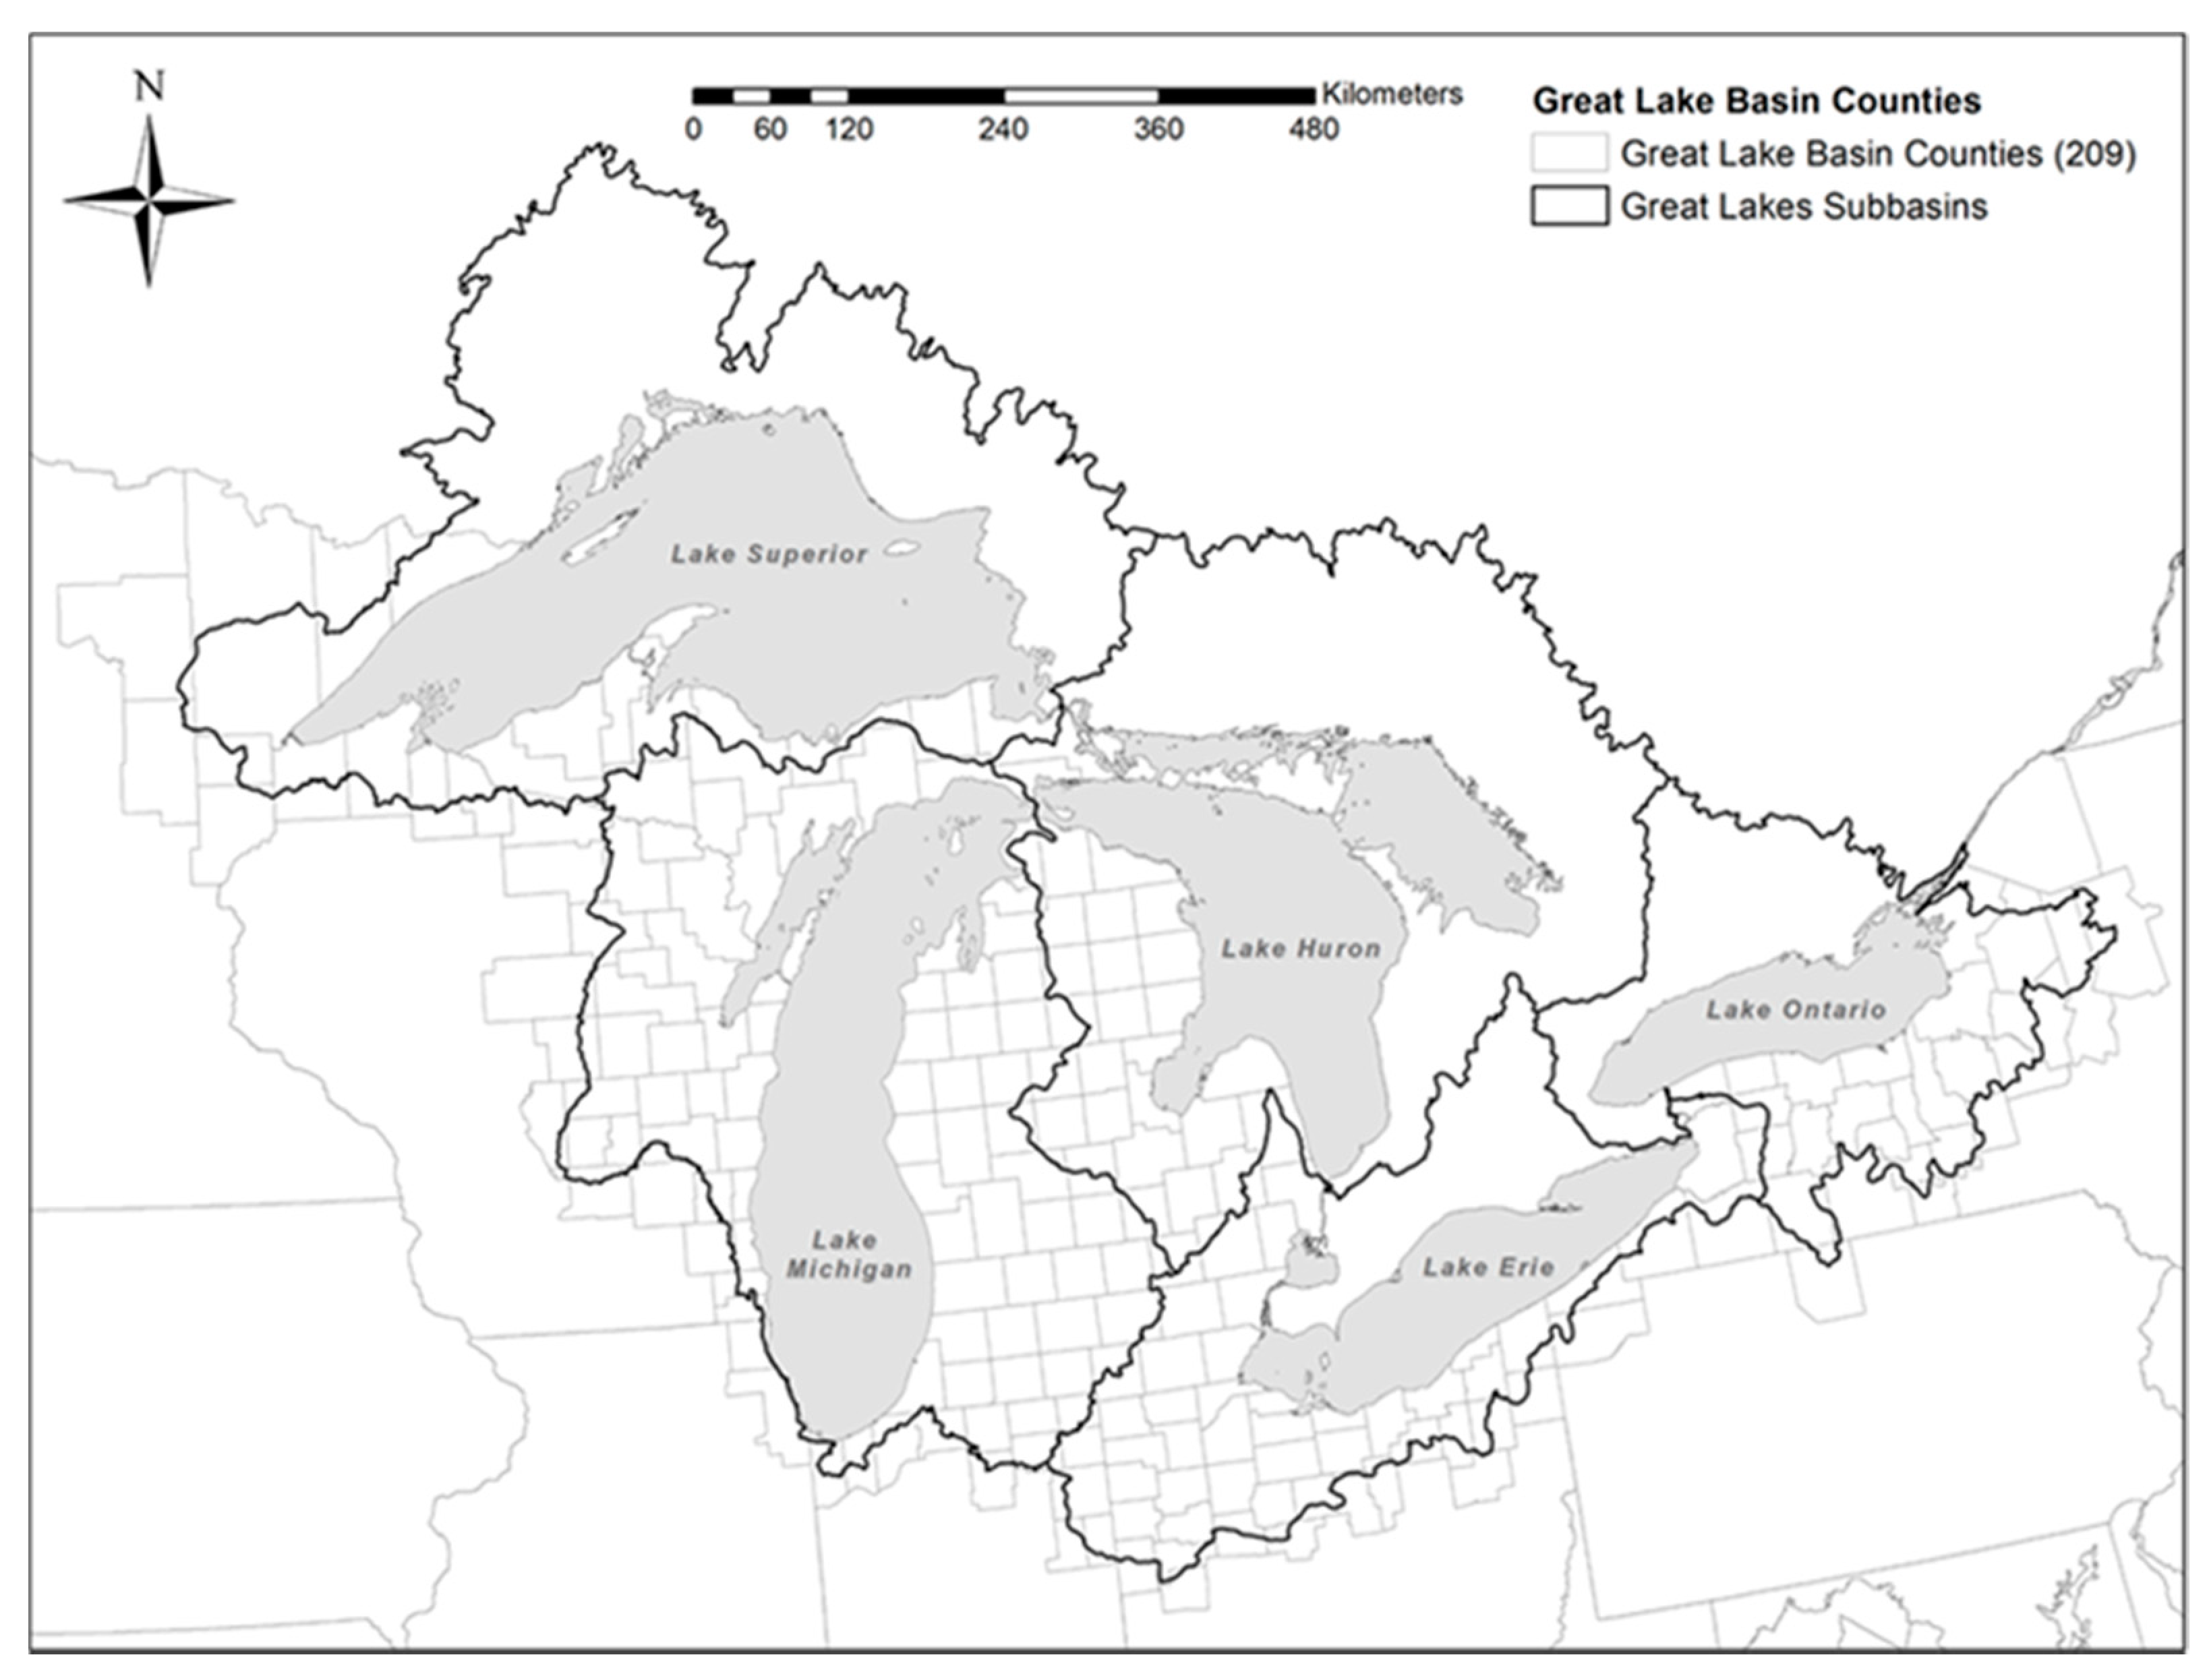 Sustainability | Free Full-Text | Social Vulnerability across the Great  Lakes Basin: A County-Level Comparative and Spatial Analysis